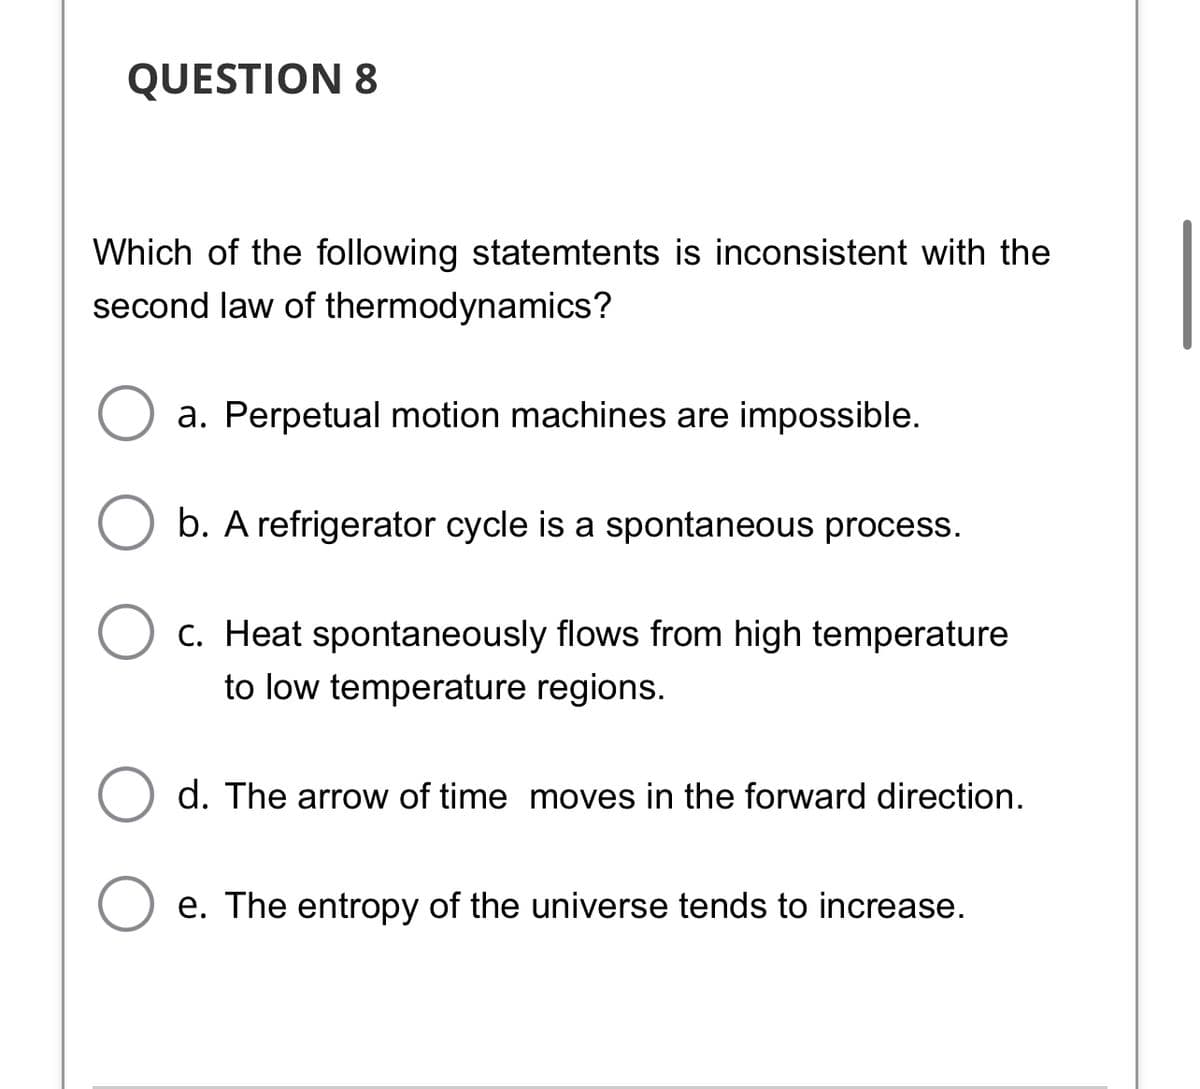 QUESTION 8
Which of the following statemtents is inconsistent with the
second law of thermodynamics?
a. Perpetual motion machines are impossible.
b. A refrigerator cycle is a spontaneous process.
c. Heat spontaneously flows from high temperature
to low temperature regions.
d. The arrow of time moves in the forward direction.
e. The entropy of the universe tends to increase.
